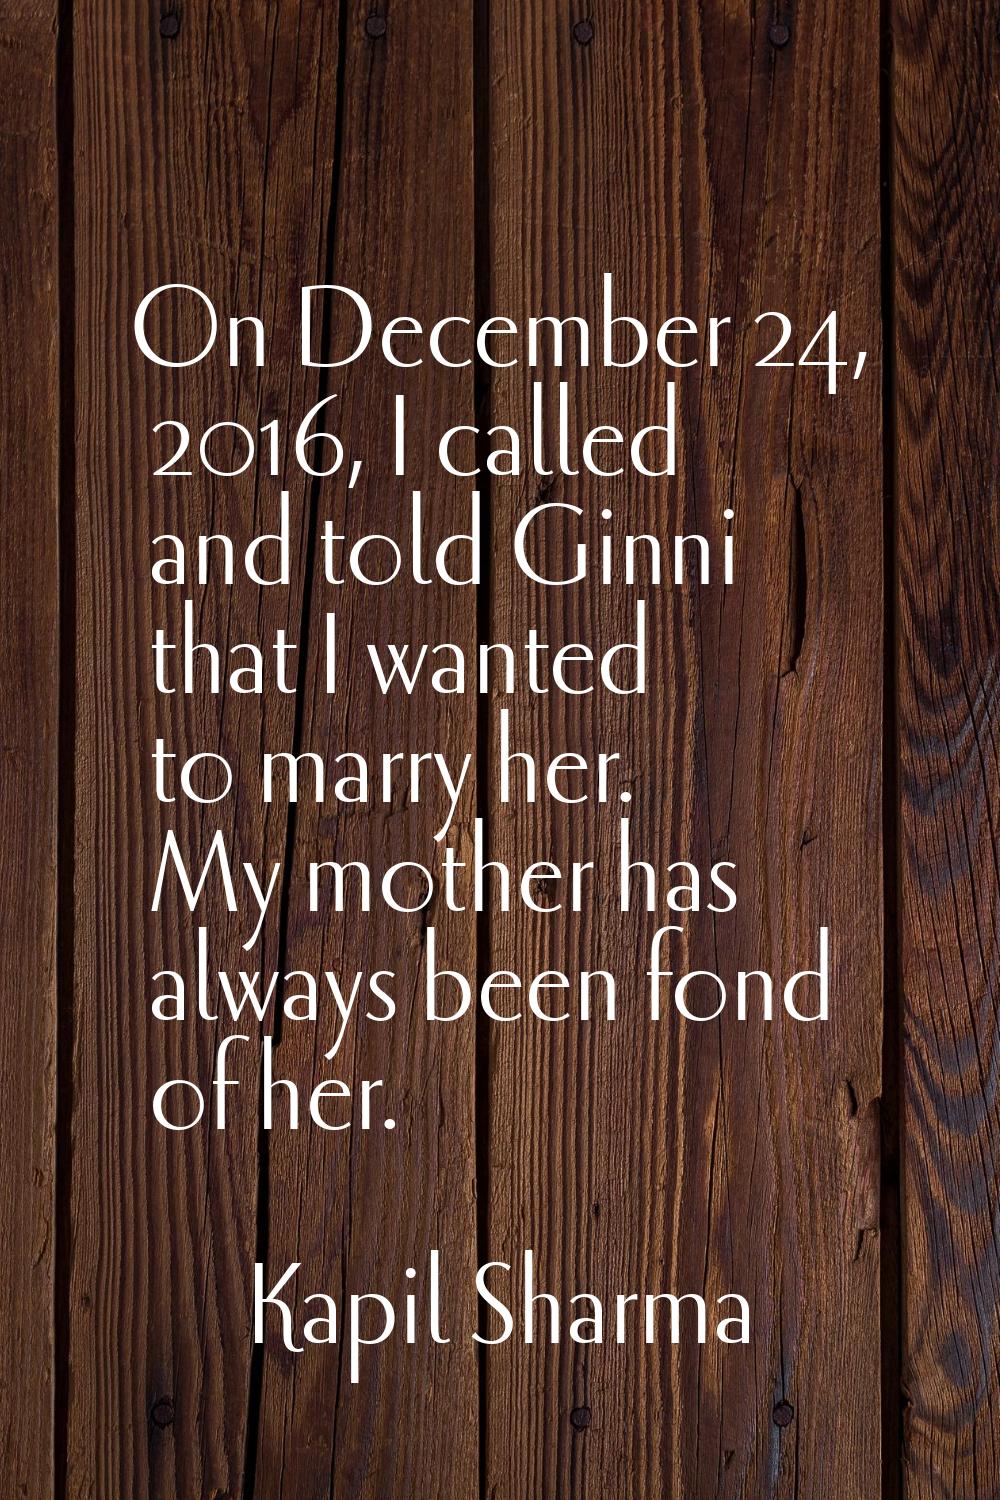 On December 24, 2016, I called and told Ginni that I wanted to marry her. My mother has always been